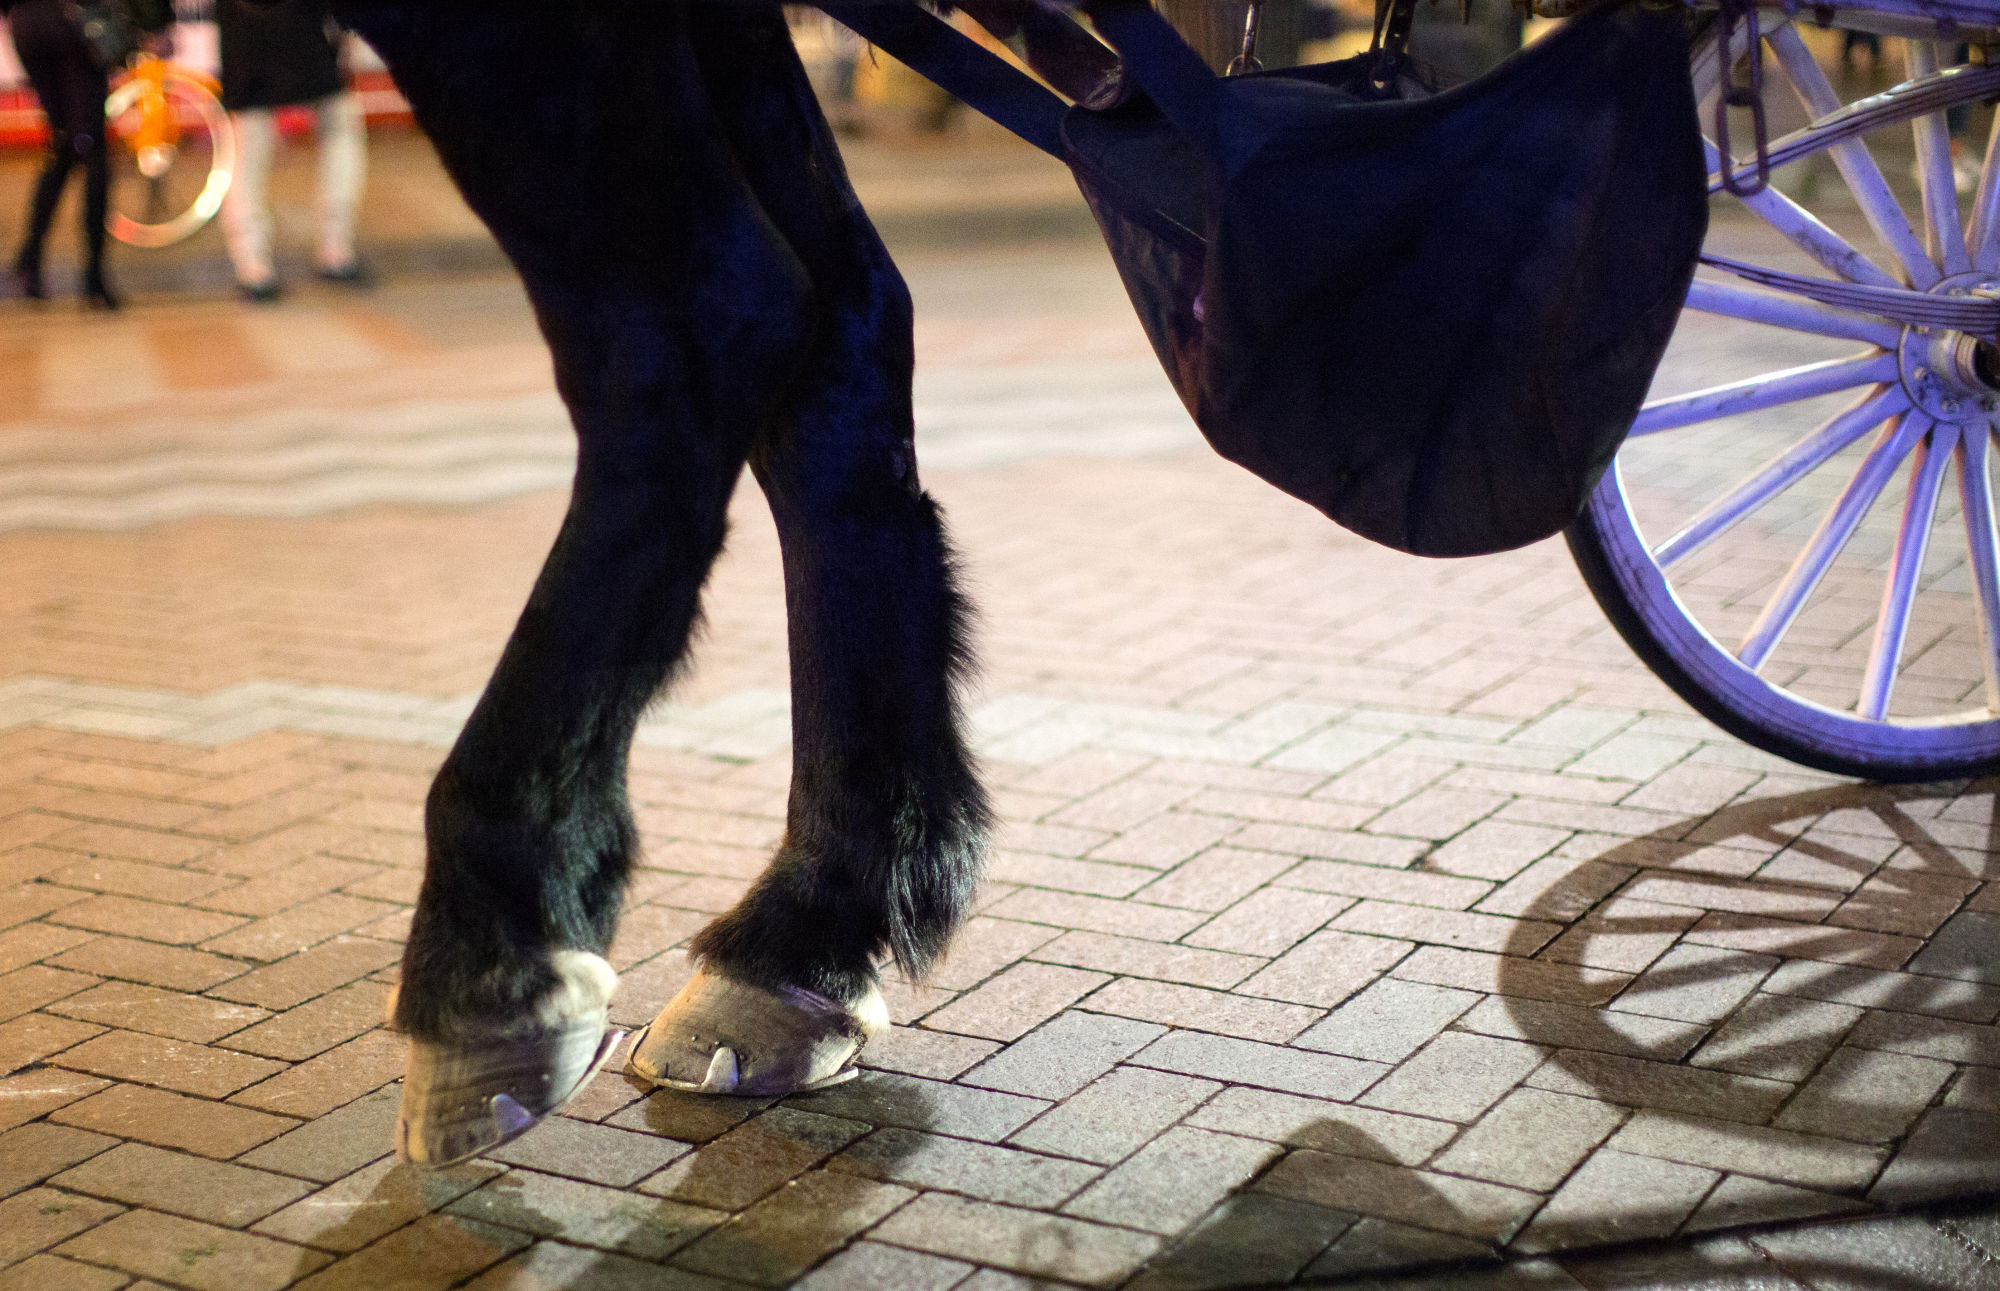 Amos, an 11-year-old Percheron draft horse, is outfitted with shoes and pads made from rubber and metal that allow him to work Seattle streets. © Karen Ducey for Crosscut 